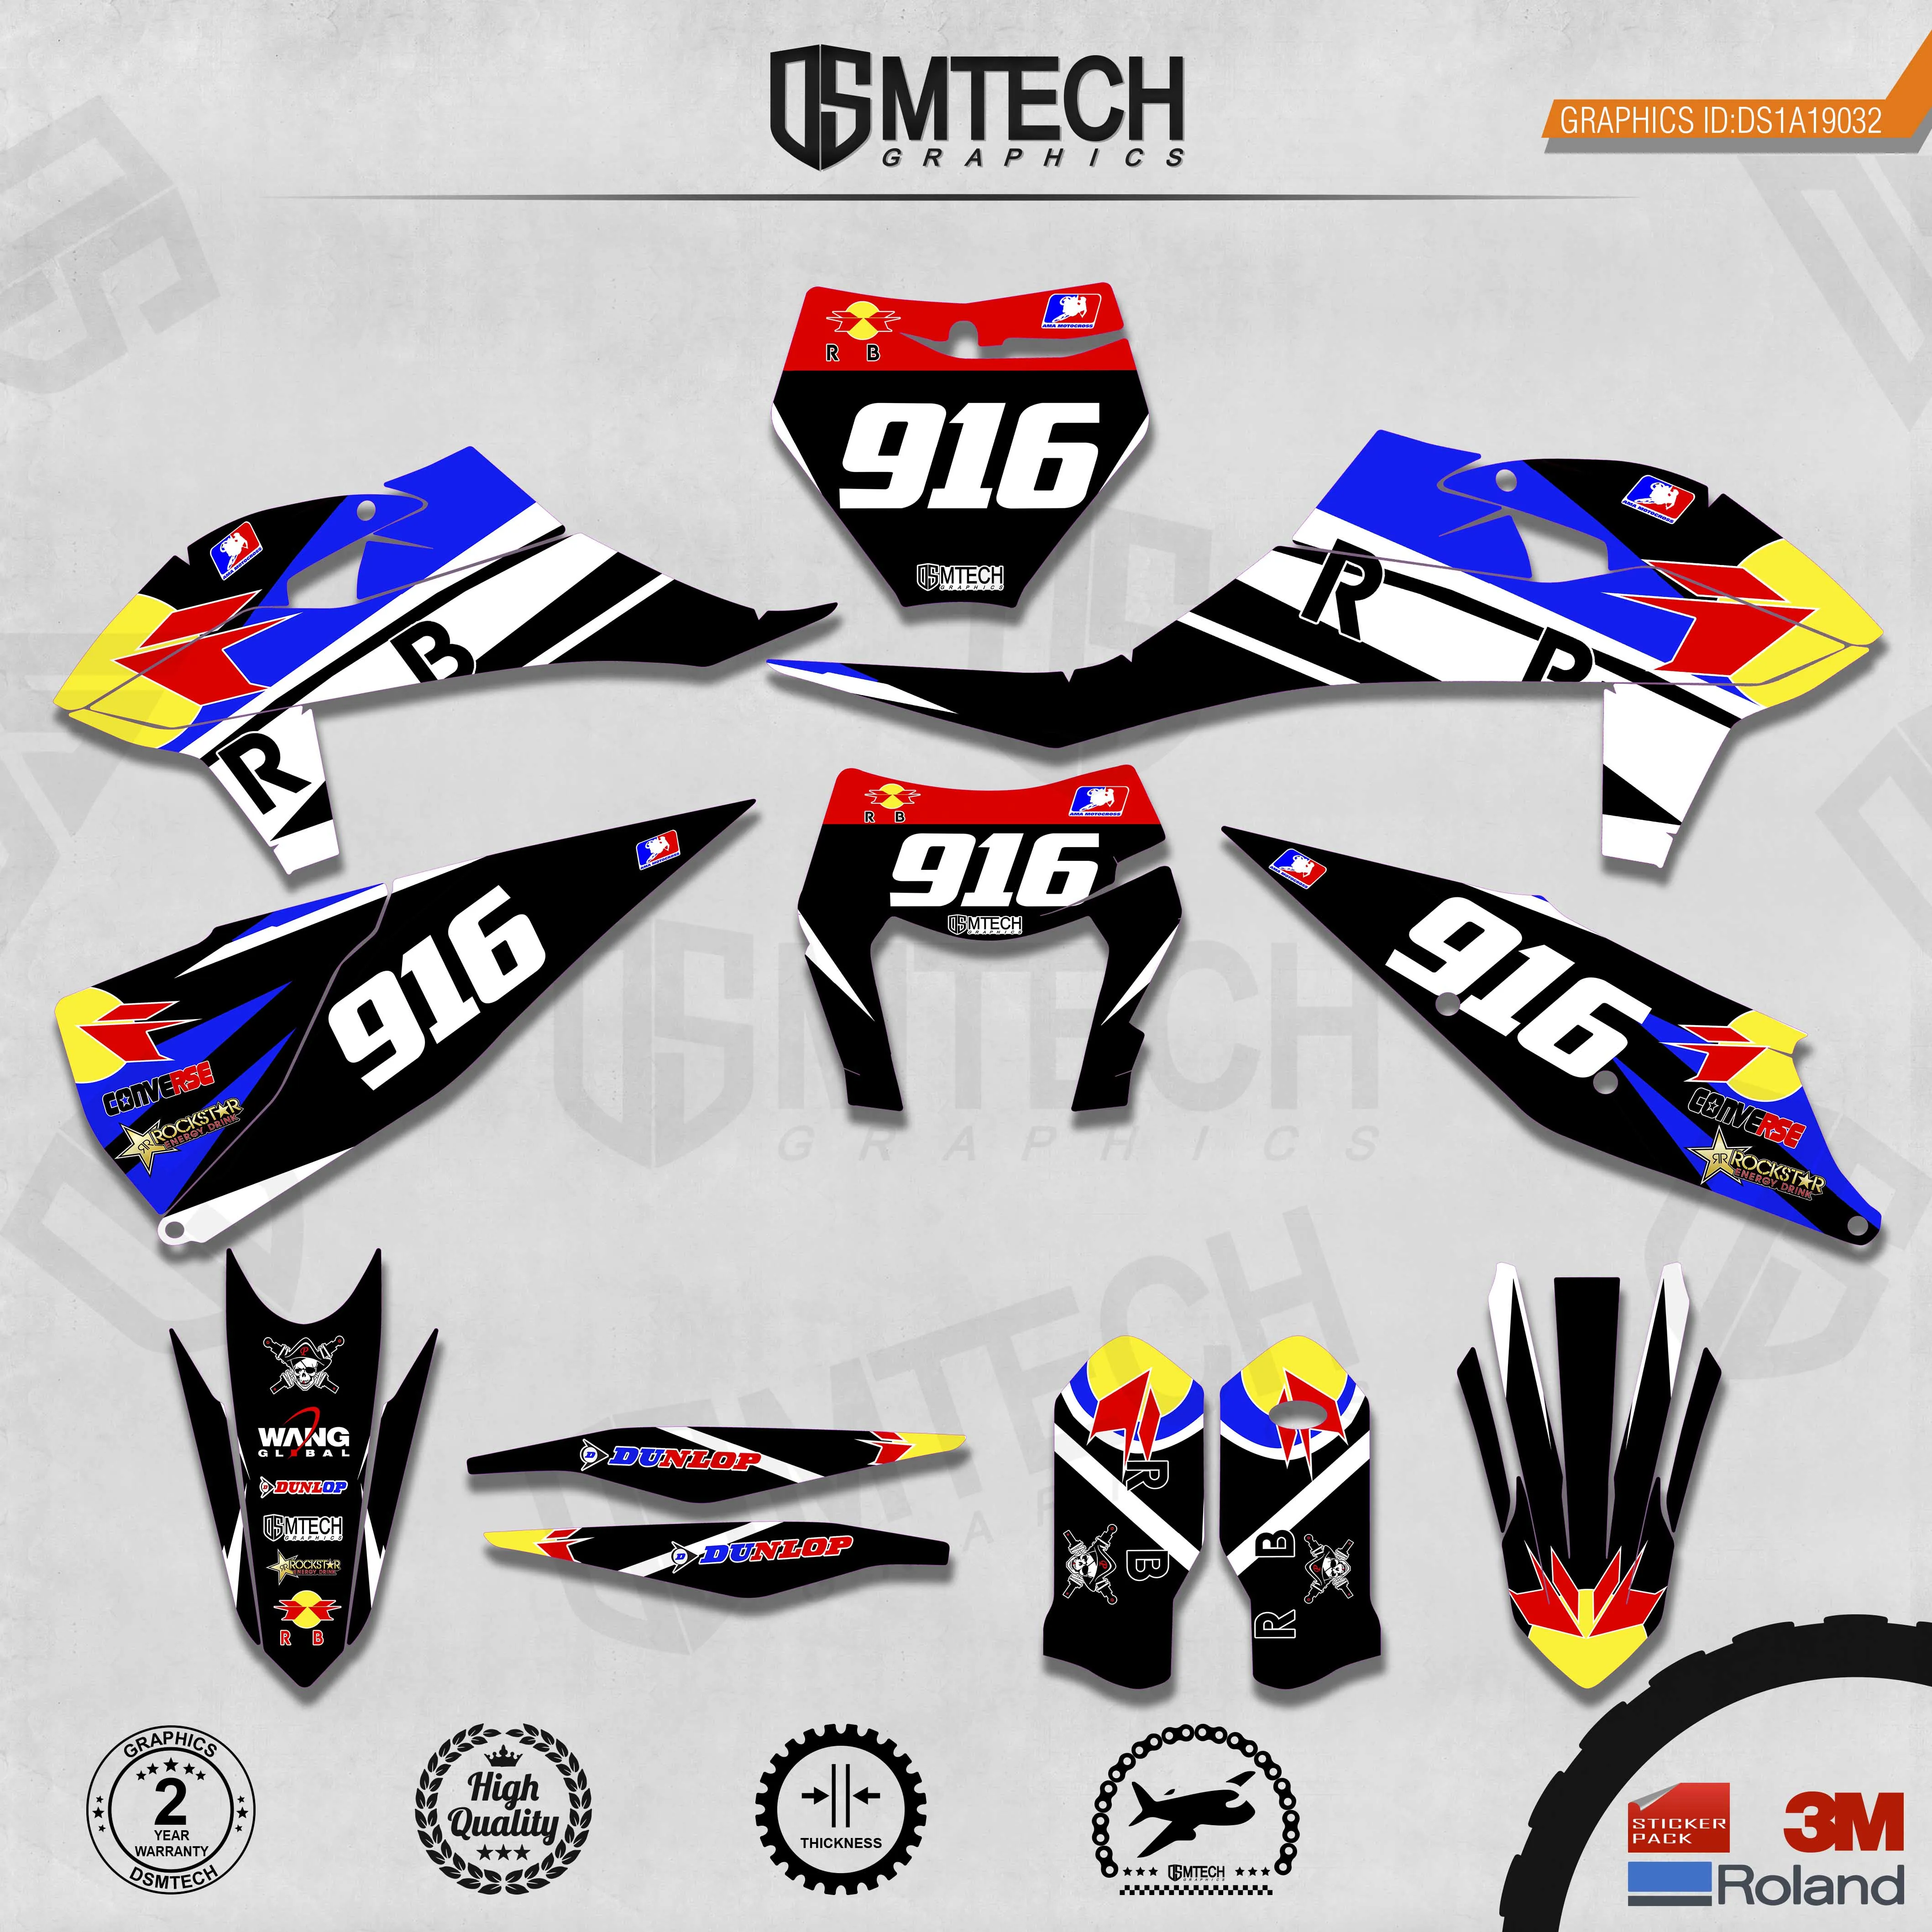 dsmtech-customized-team-graphics-backgrounds-decals-3m-custom-stickers-for-2019-2020-sxf-2020-2021exc-032